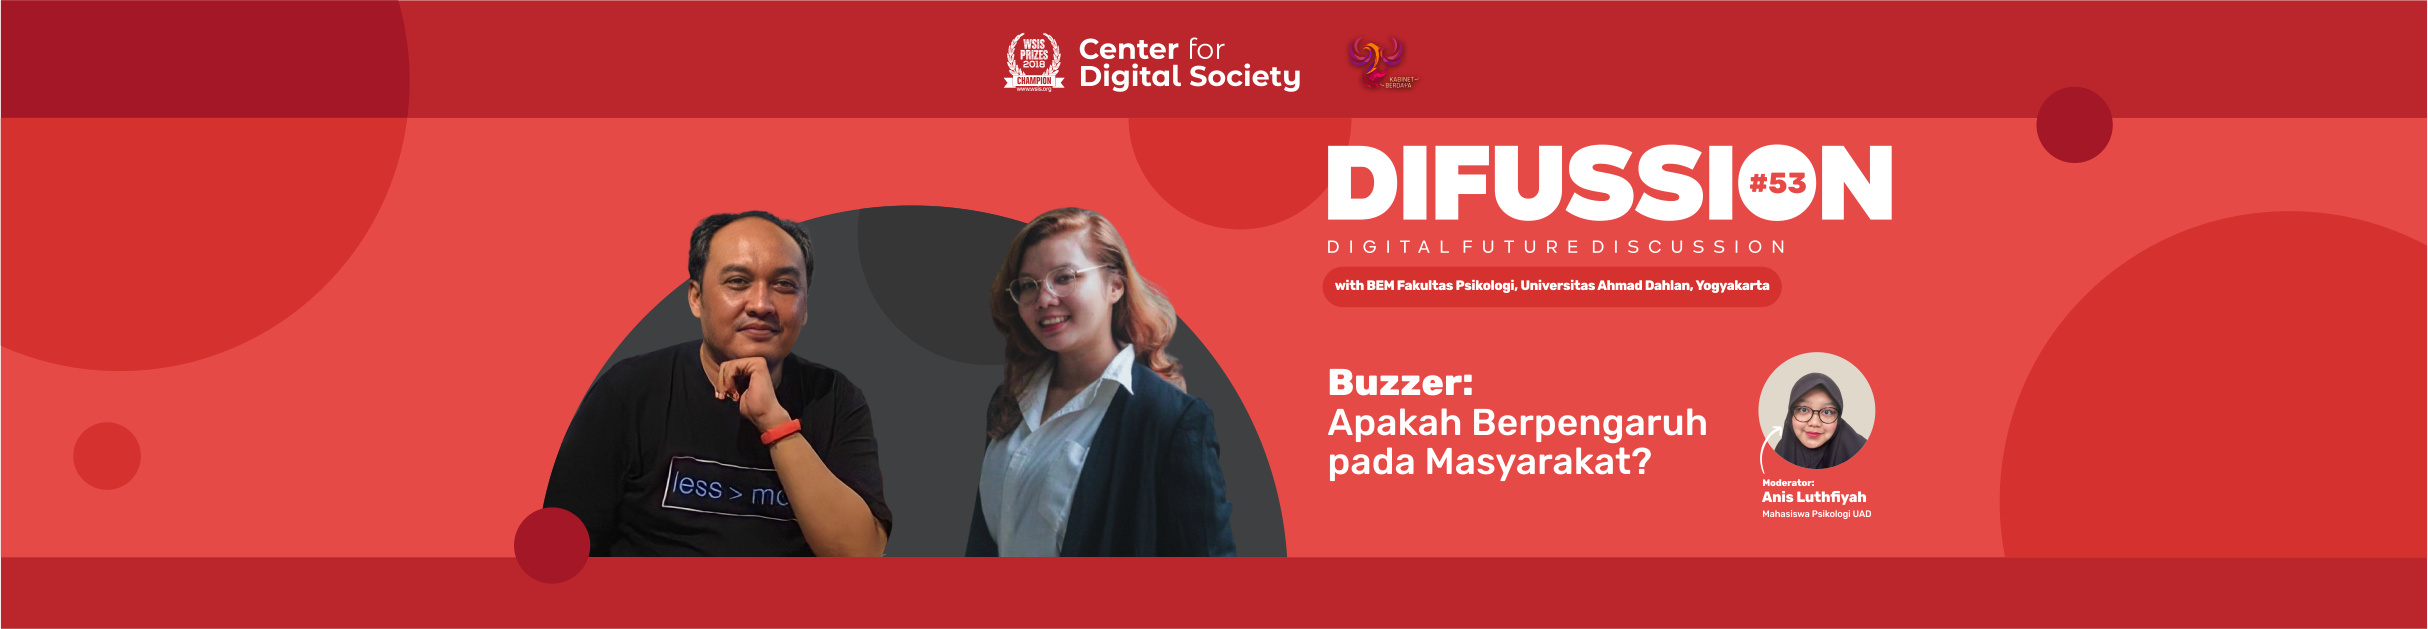 [PRESS RELEASE] Buzzer: How Does It Affect Society’s Psychology?| Difussion #53